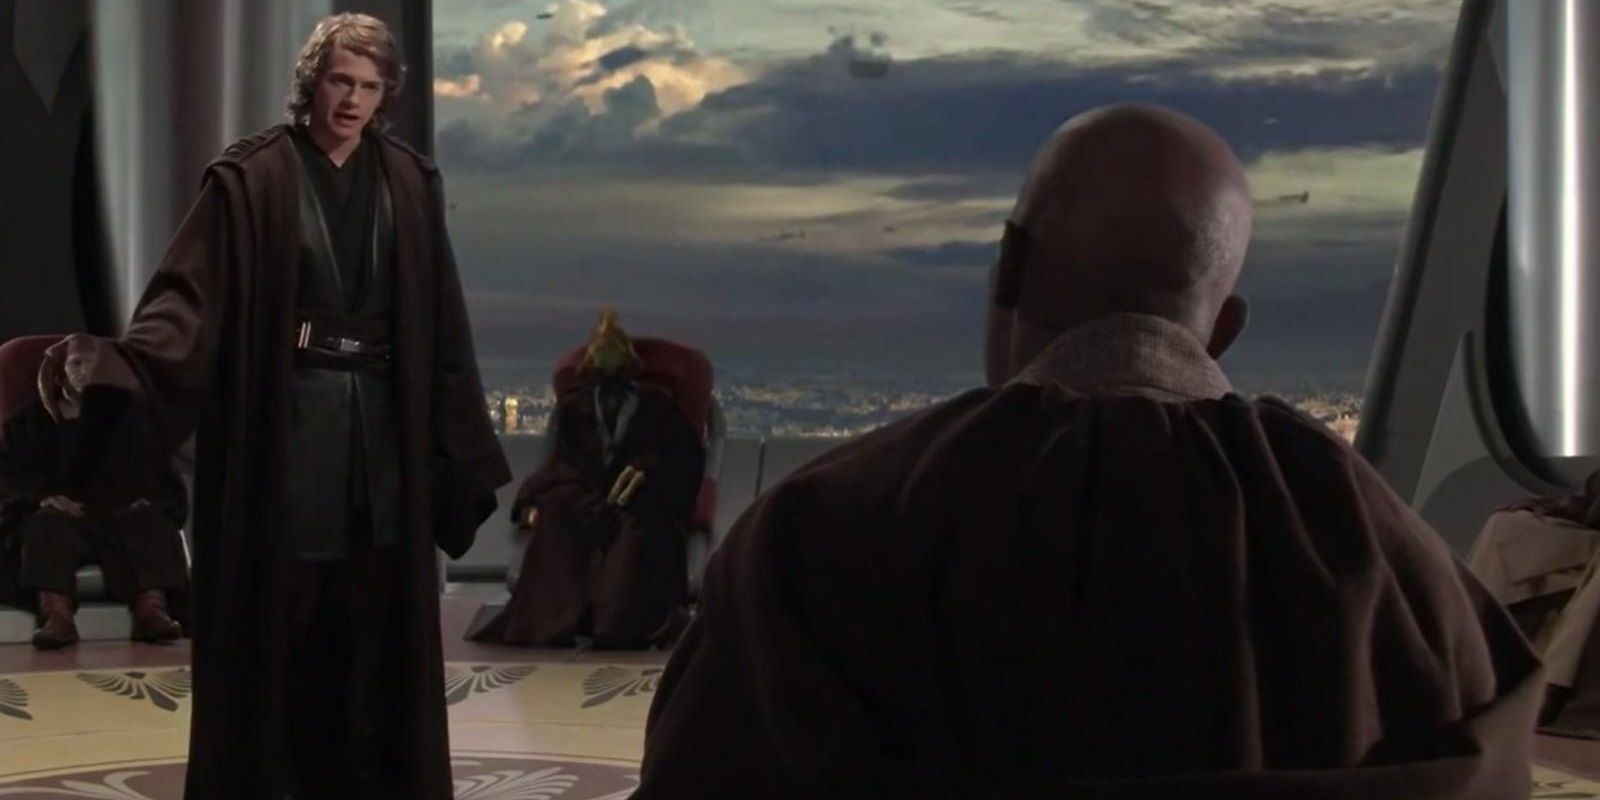 Anakin and Mace Windu in the Jedi Council in Revenge of the Sith